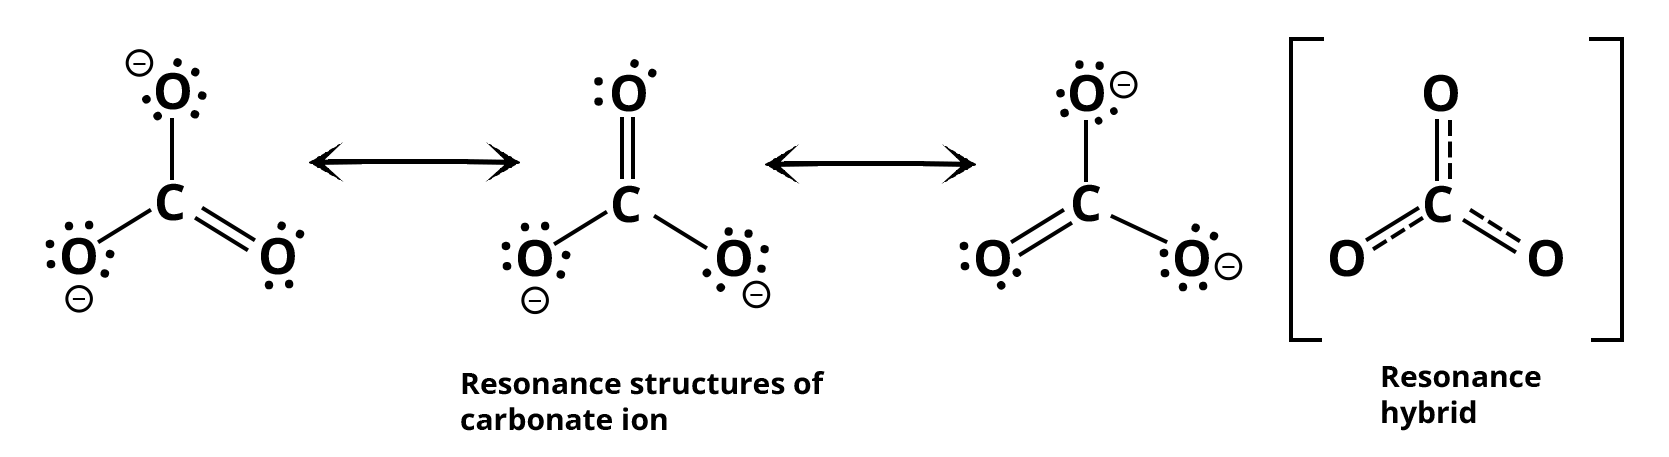 Resonance Structure of Carbonate Ions